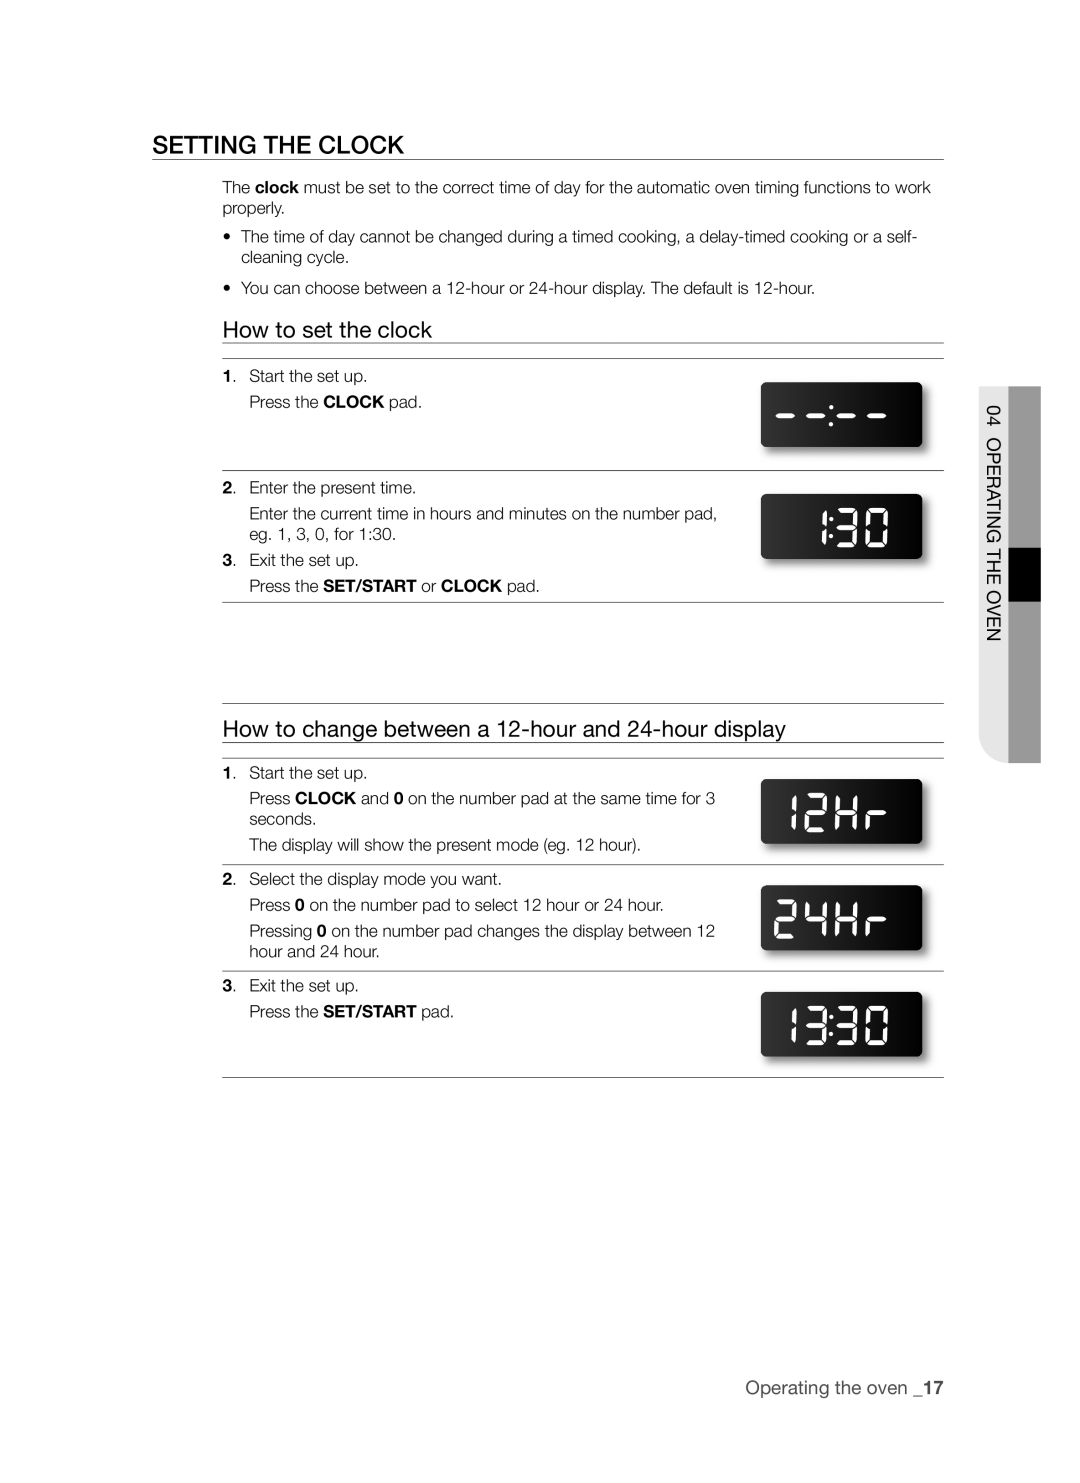 Samsung FCQ321HTUX user manual Setting The Clock, How to set the clock, How to change between a 12-hour and 24-hour display 